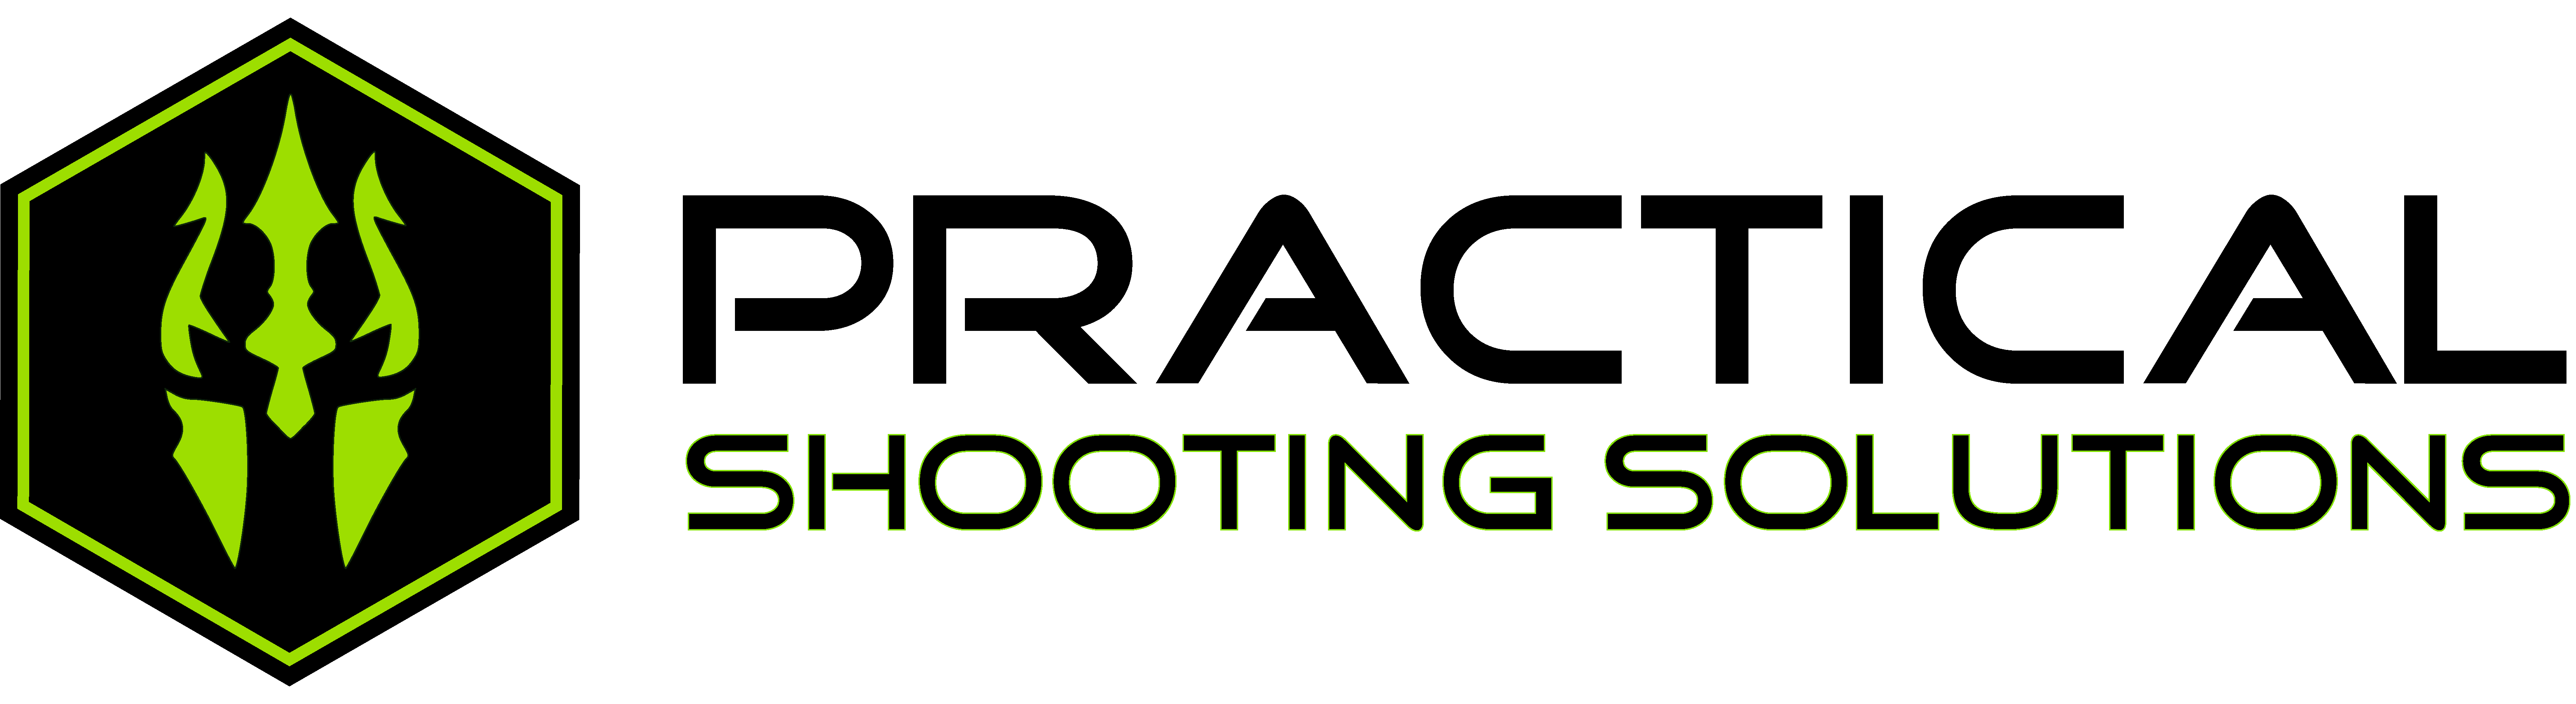 Practical Shooting Solutions